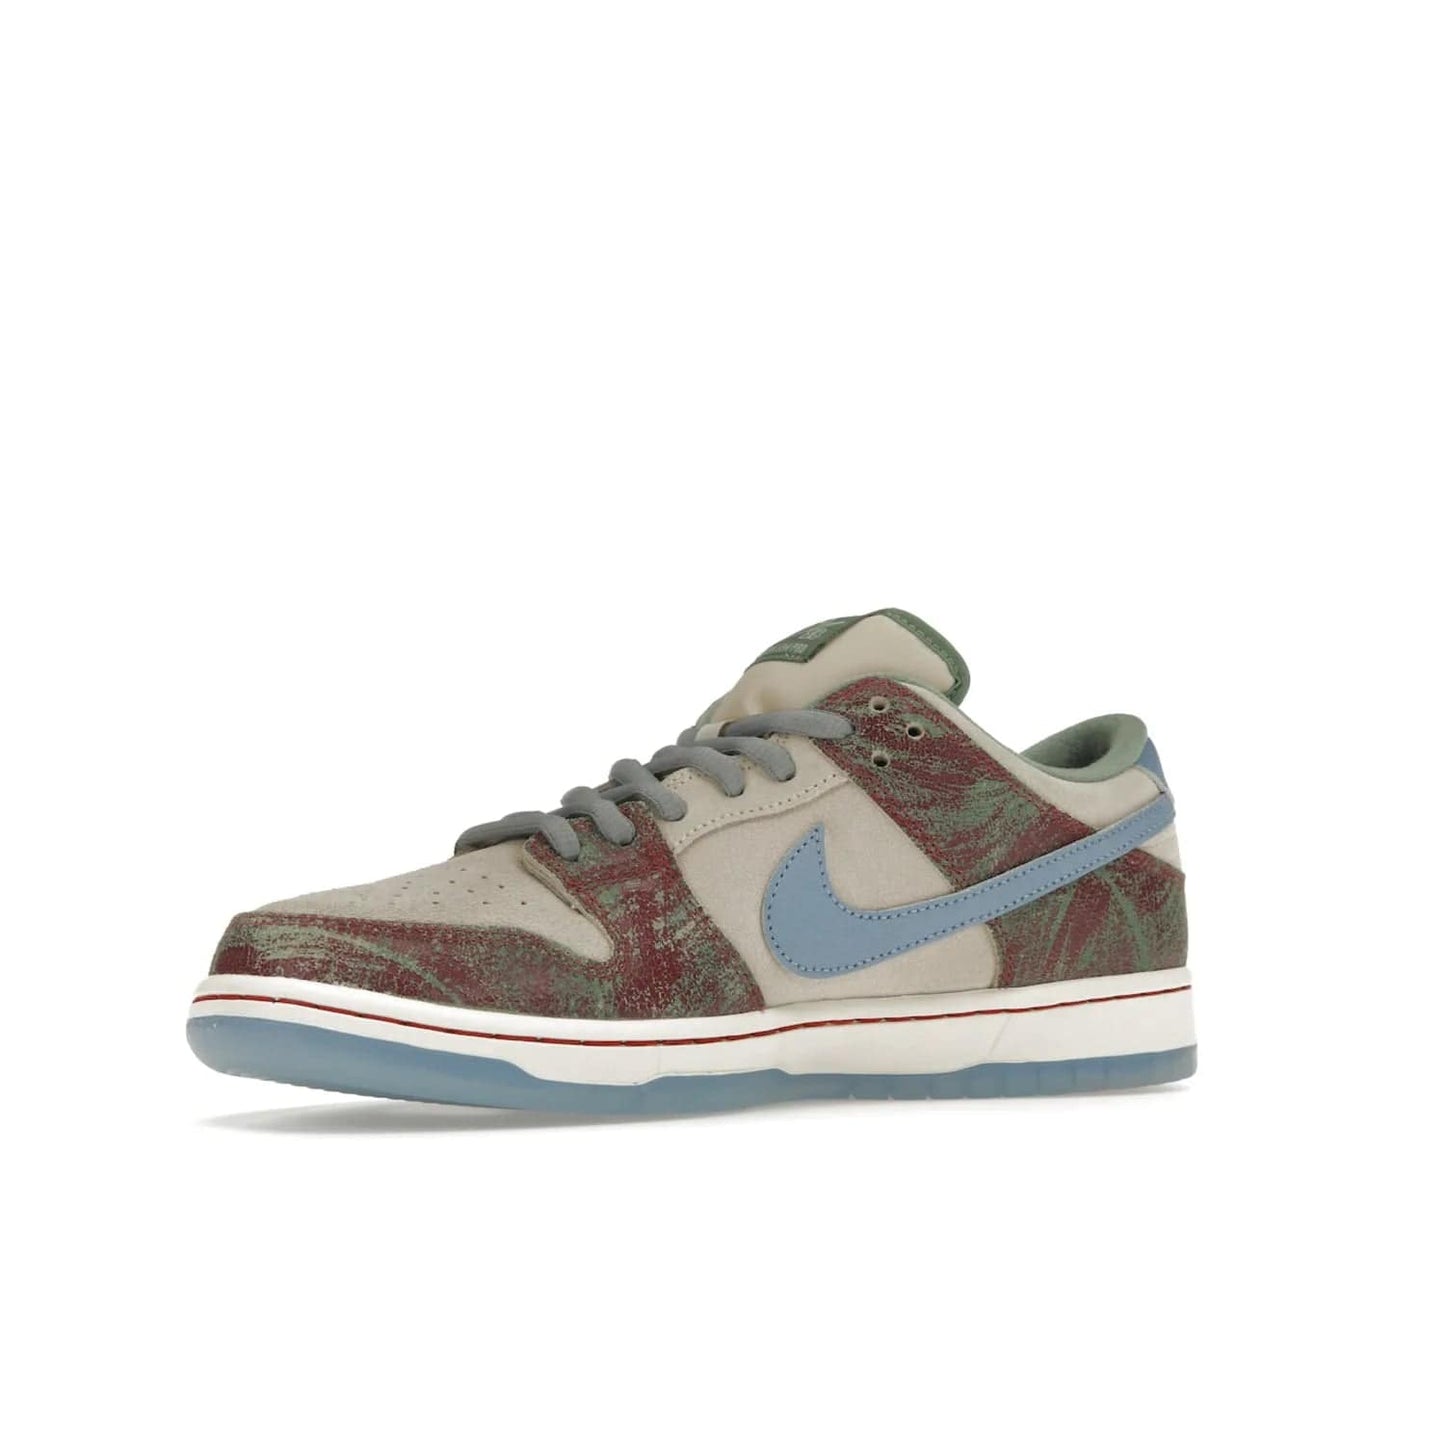 Nike SB Dunk Low Crenshaw Skate Club - Image 16 - Only at www.BallersClubKickz.com - Introducing the Nike SB Dunk Low Crenshaw Skate Club! Classic skate shoes with Sail and Light Blue upper, Cedar accents, padded collars and superior grip for comfortable, stable performance and style. Ideal for any skate session.